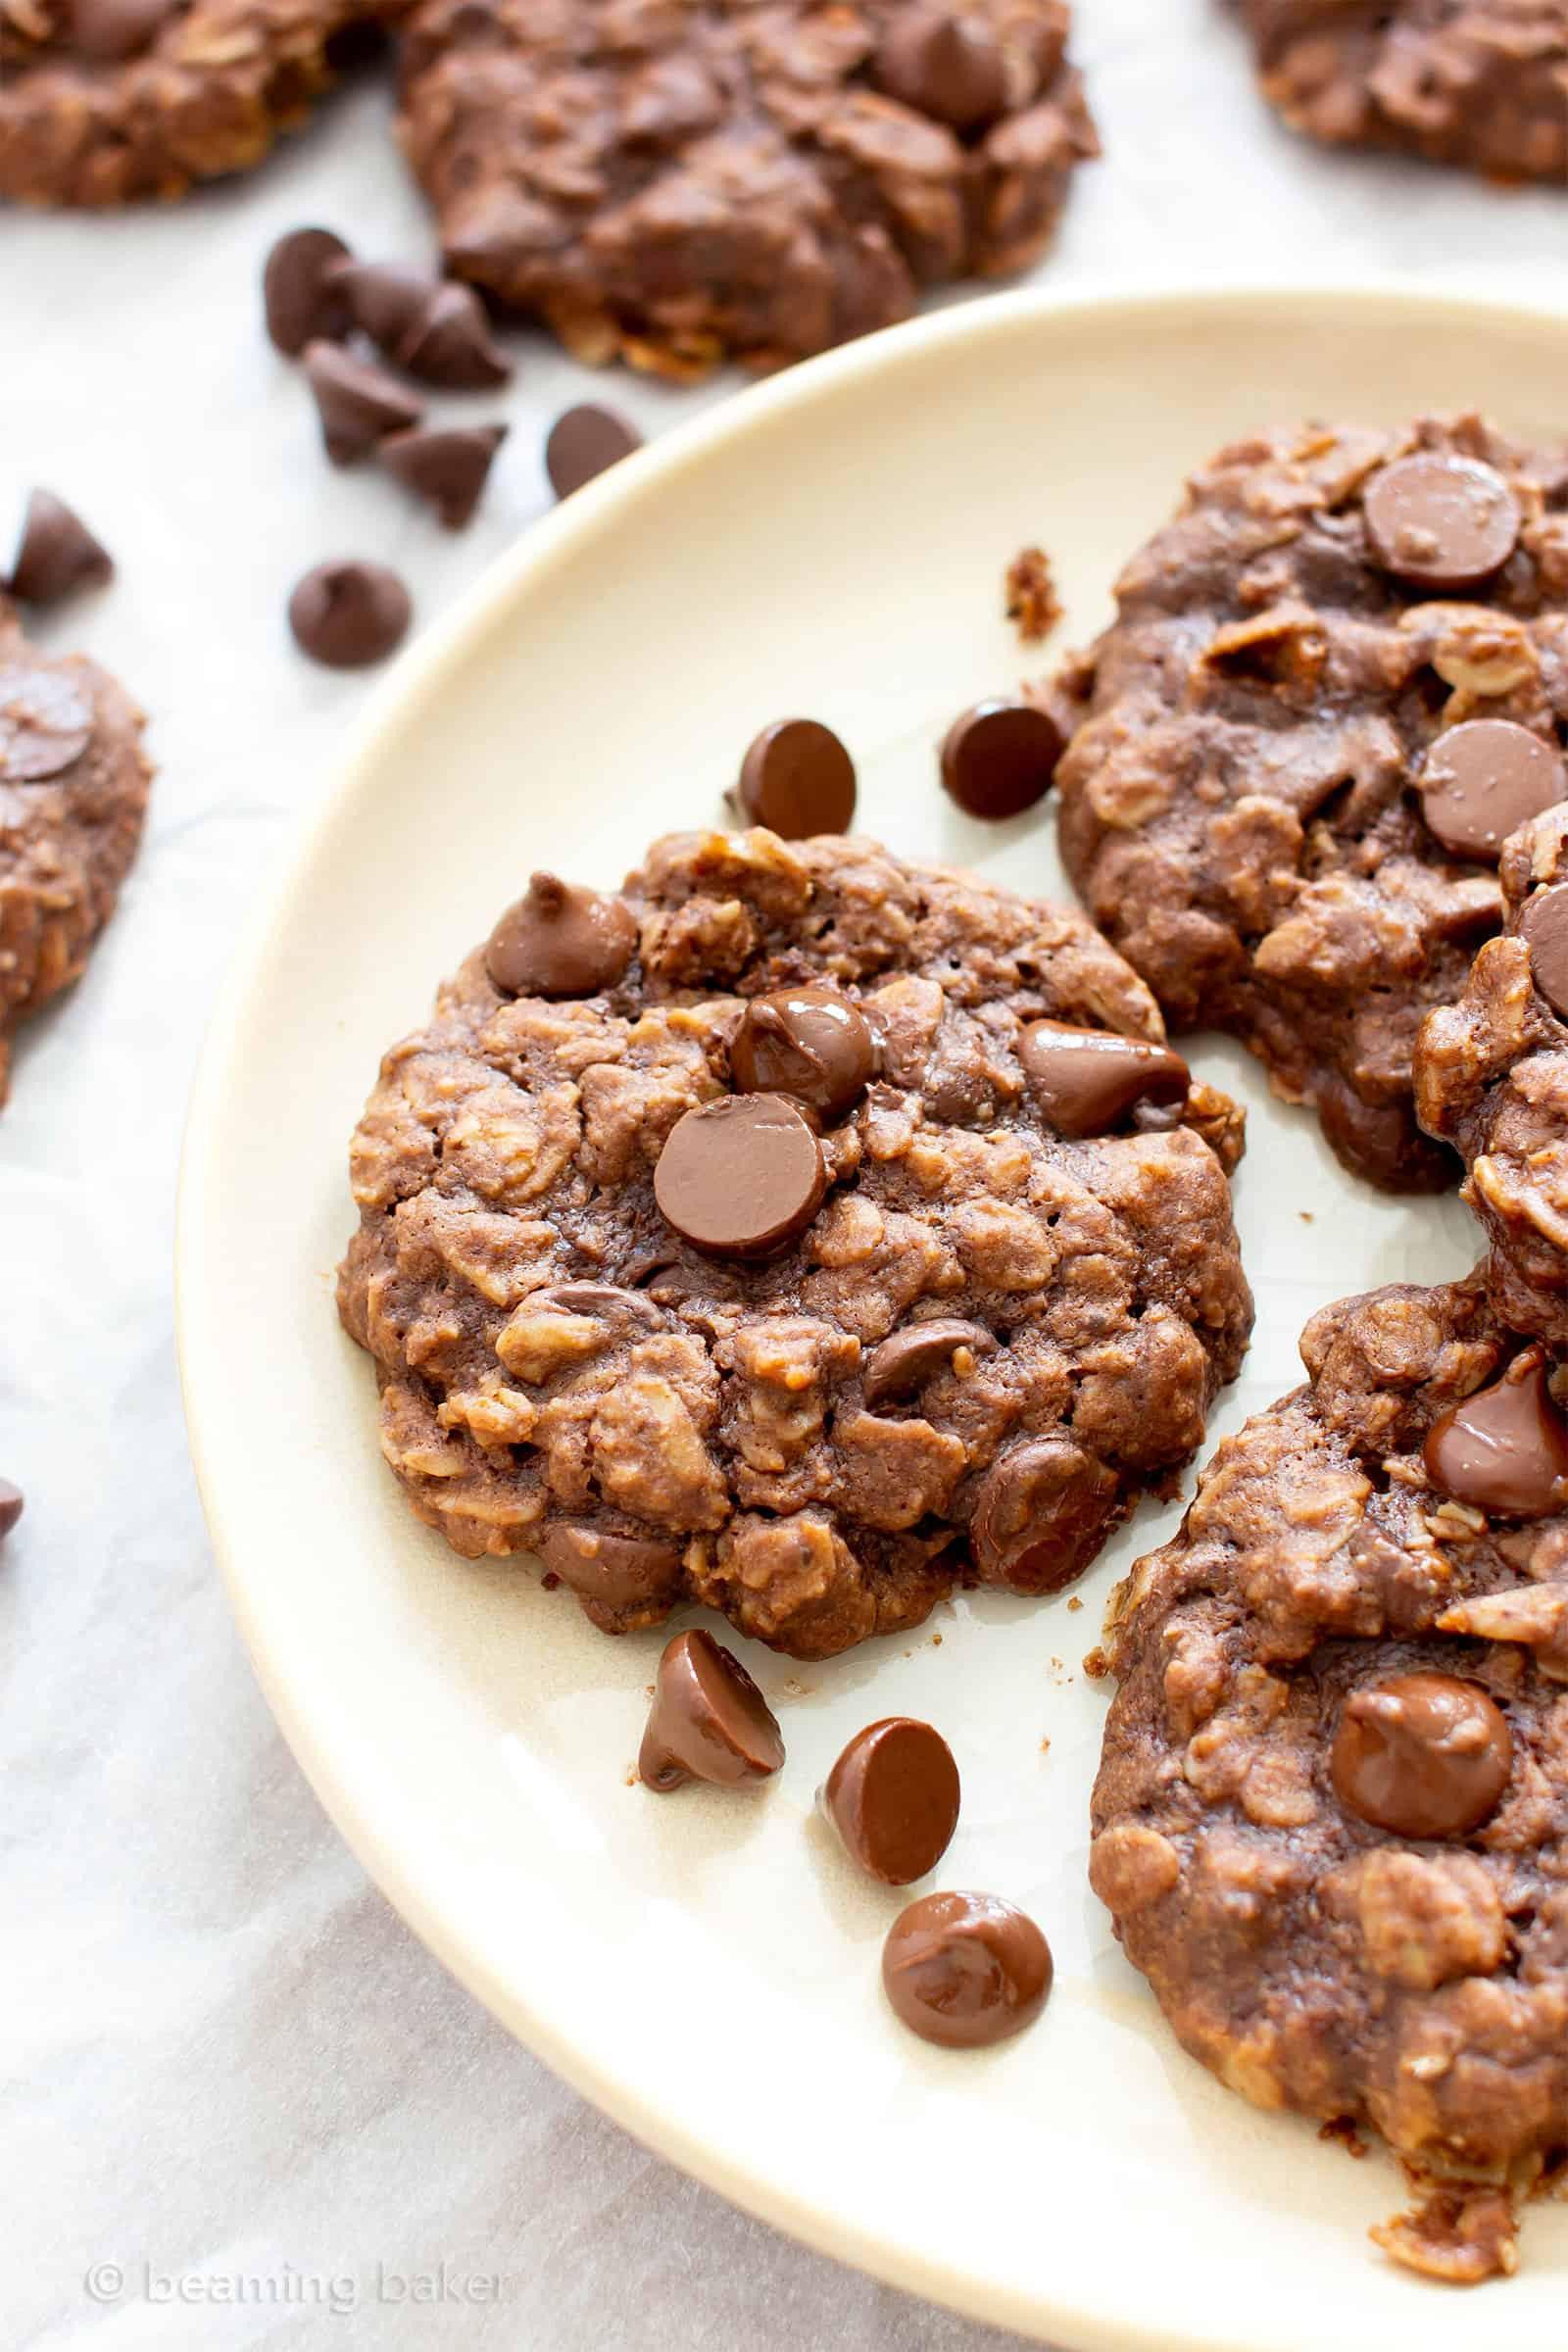 Choc Chip Oatmeal Cookies Healthy
 Vegan Double Chocolate Chip Chewy Oatmeal Cookies Gluten